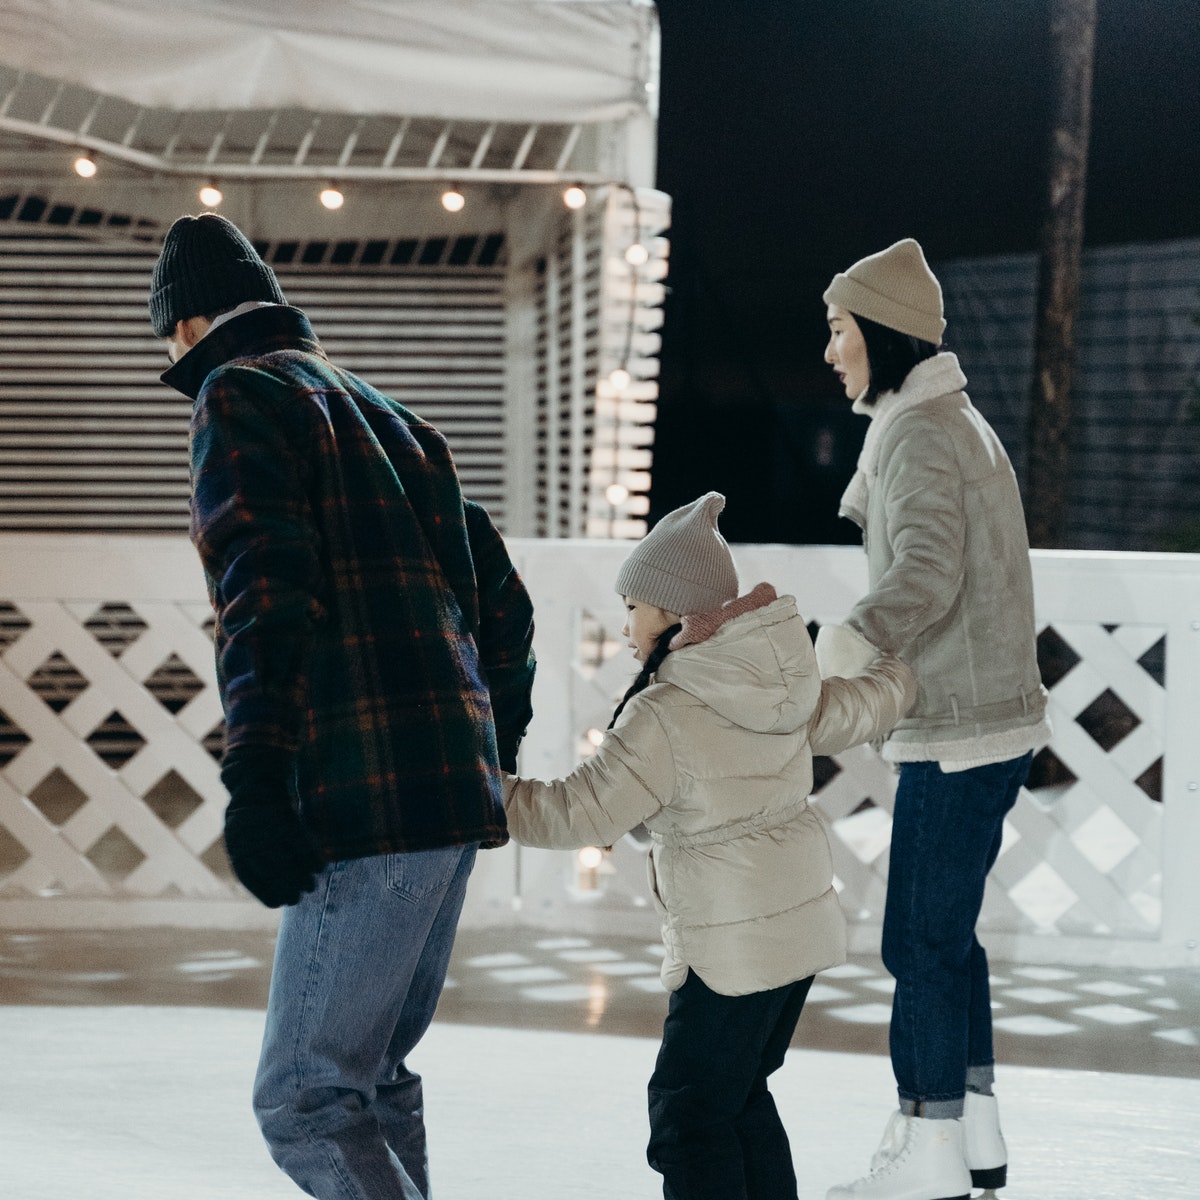 family skating on outdoor ice rink with white fence around it